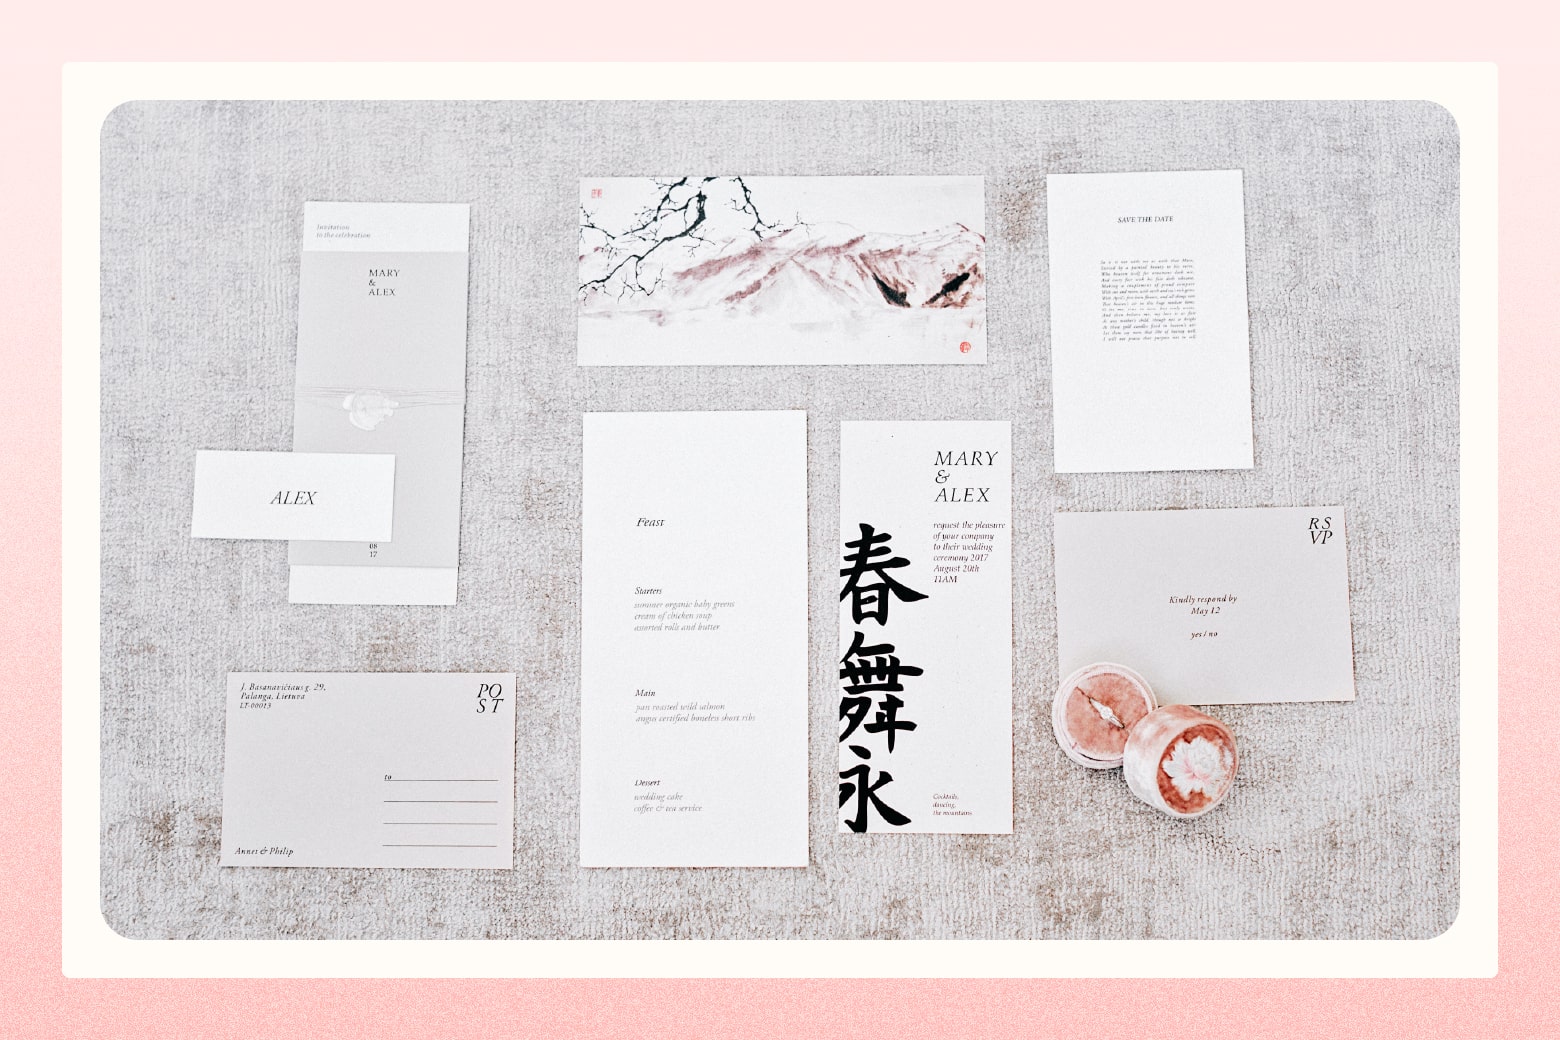 A wedding stationary suite for Mary and Alex, featuring large bold Japanese kanji characters and mountain scenery